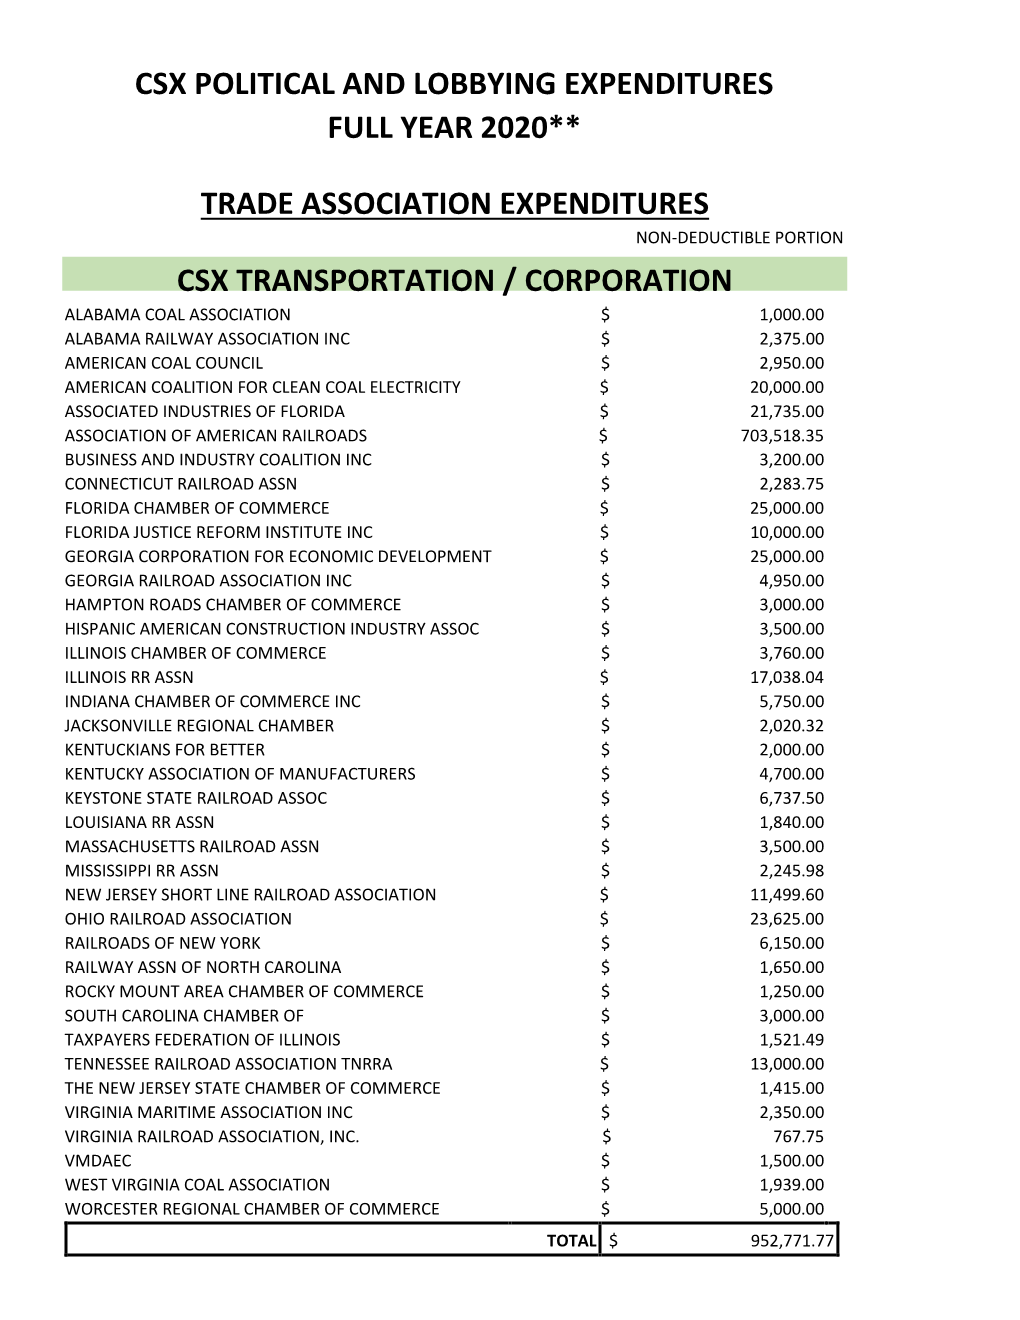 CSX Political and Lobbying Expenditures Summary